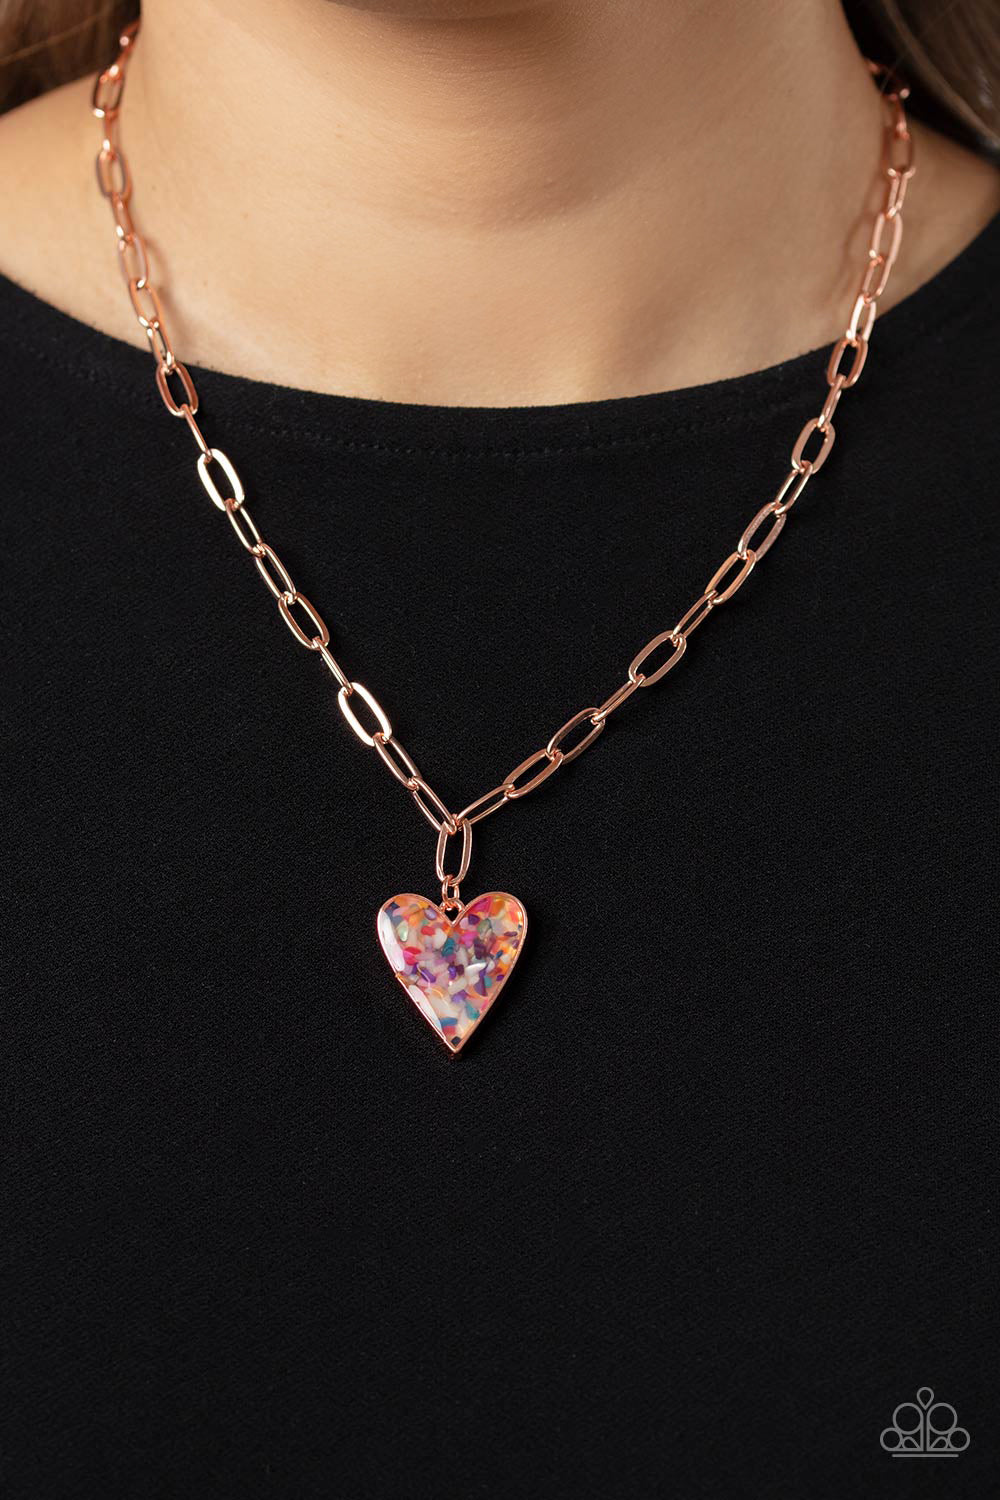 copper, copper jewelry, heart, heart jewelry, shell, valentines day jewelry, affordable jewelry, affordable holiday, everyday jewelry, trending jewelry, viral jewelry, adjustable ring, ring, paparazzi accessories, jewelry stores, jewelry stores near, 